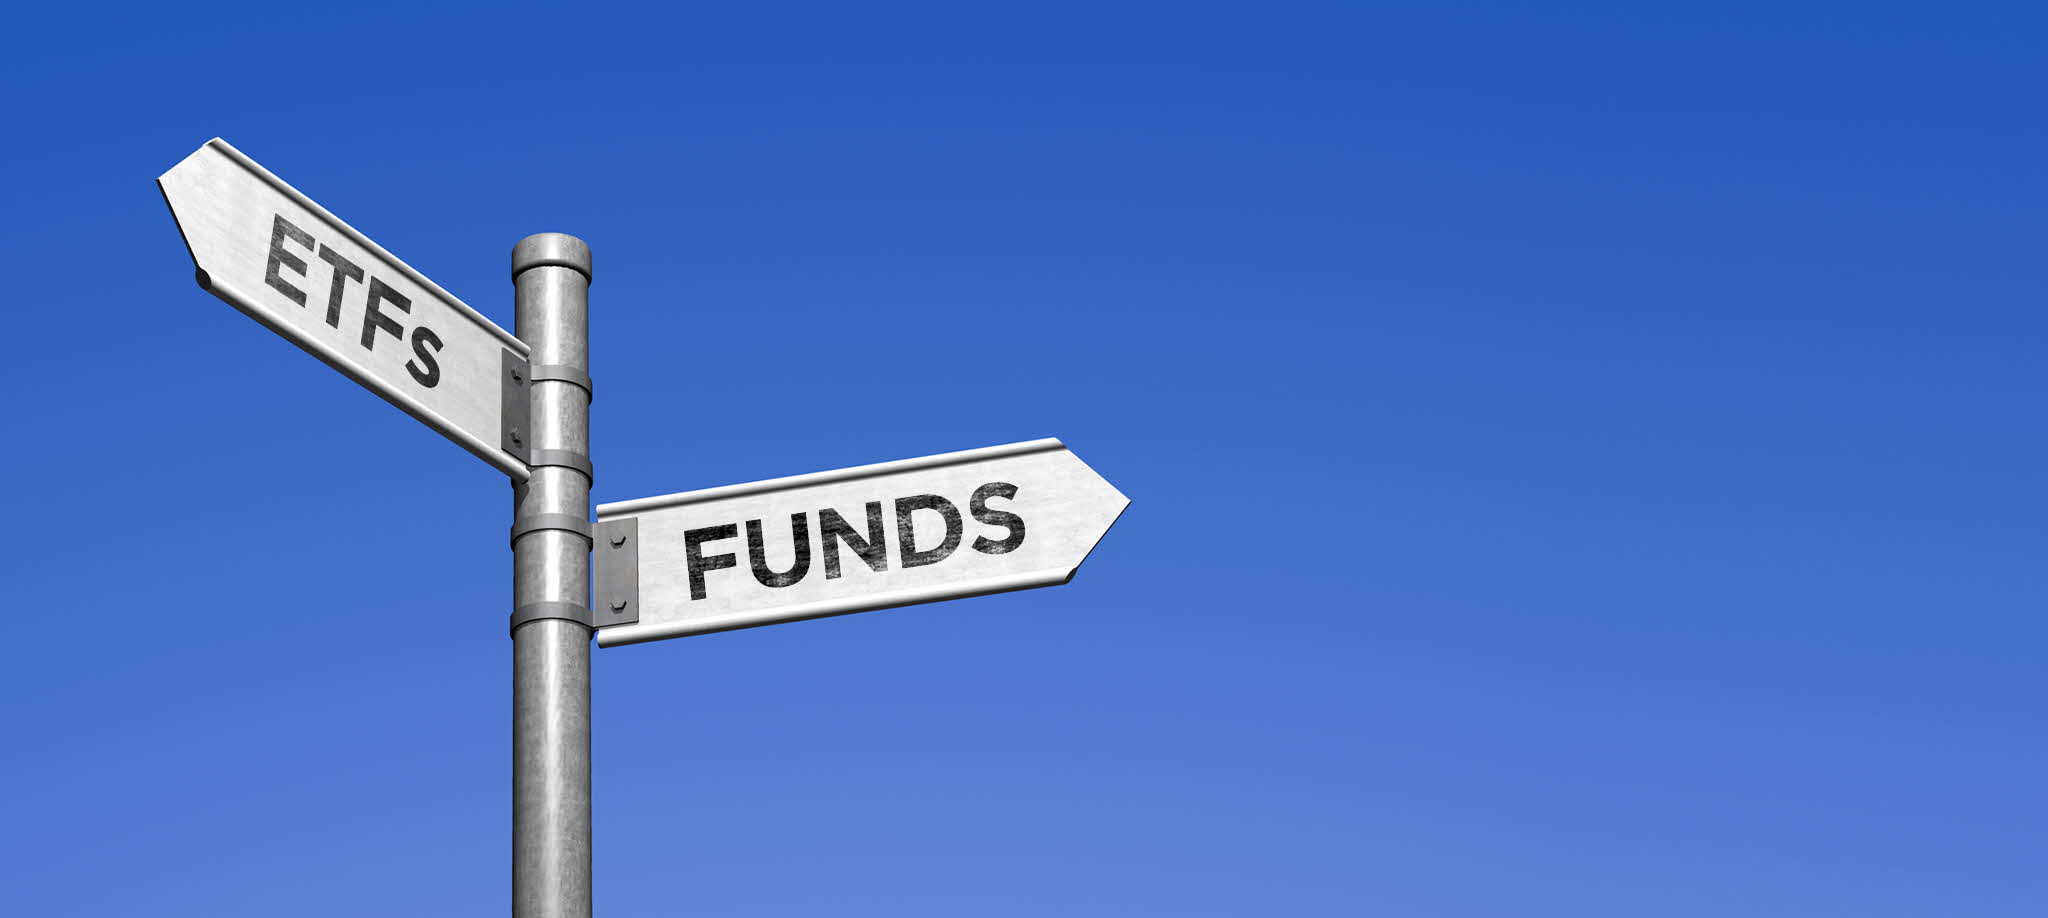 ETFs vs Funds. 3 ways they’re driven differently.